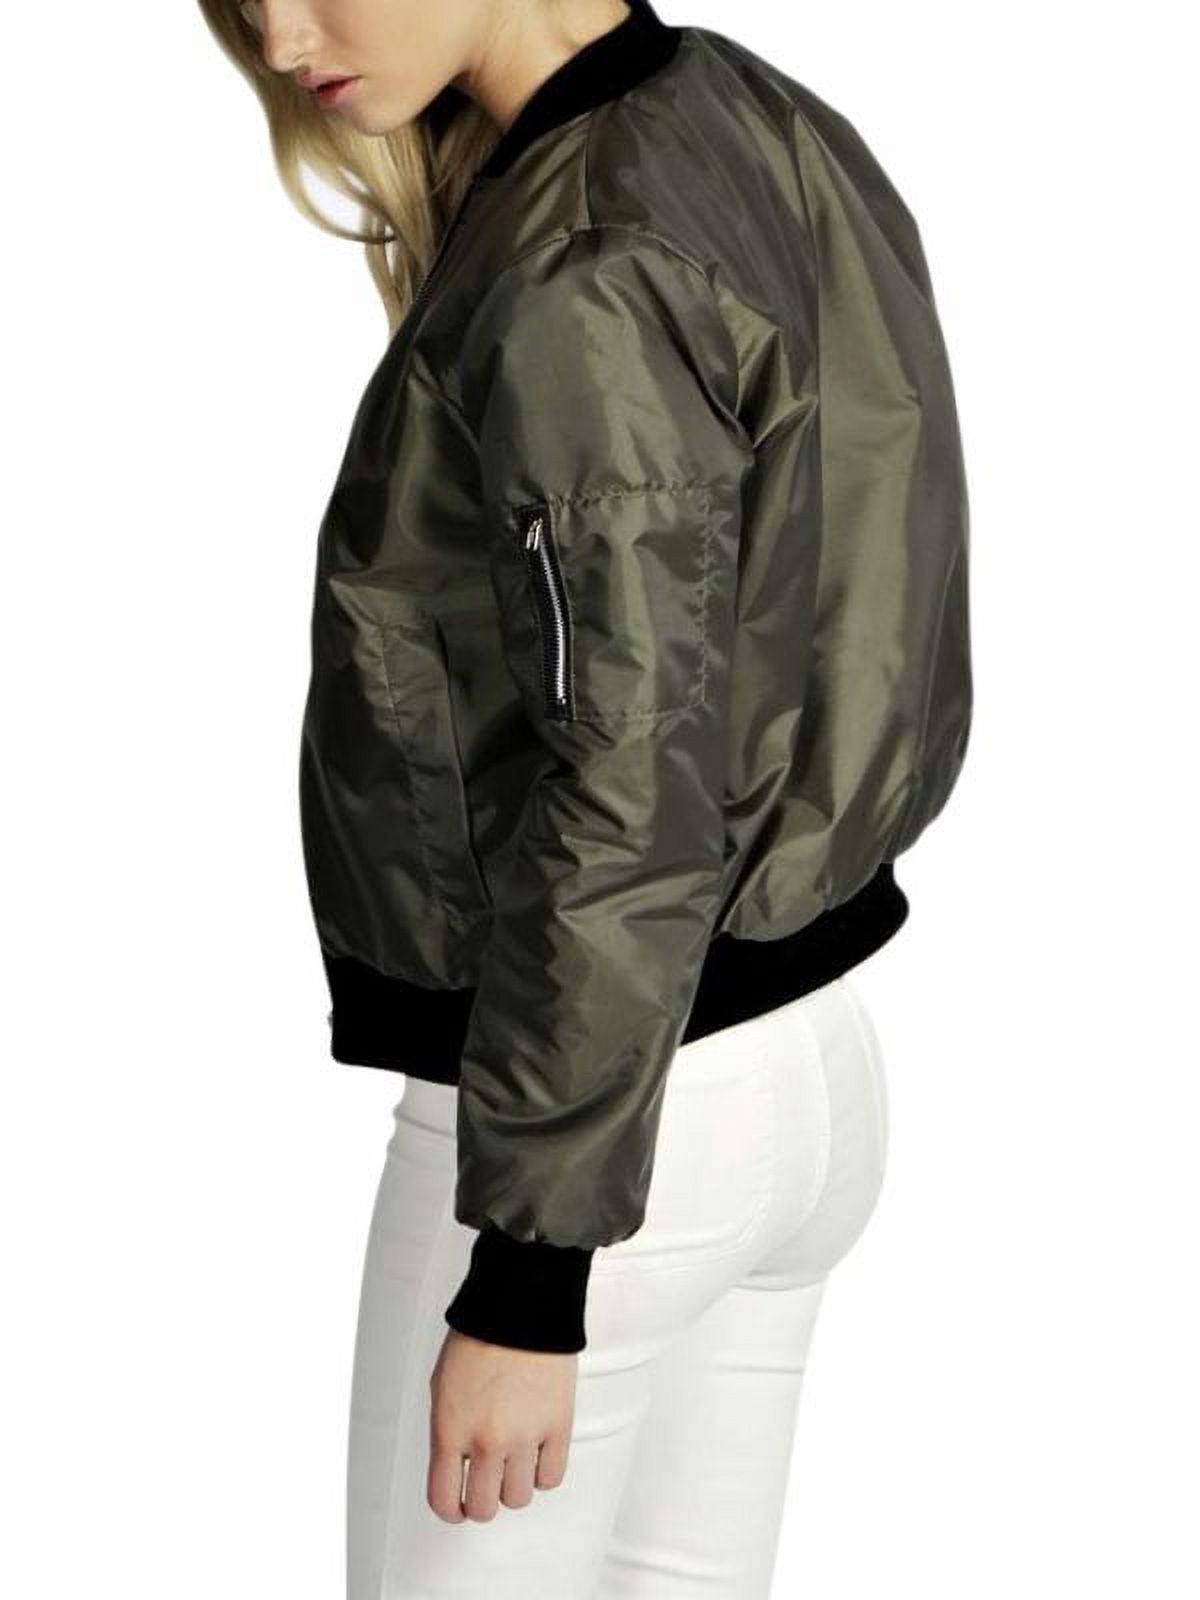 Womens Classic Full-Zip Quilted Jacket Short Bomber Jacket Coat - image 2 of 2